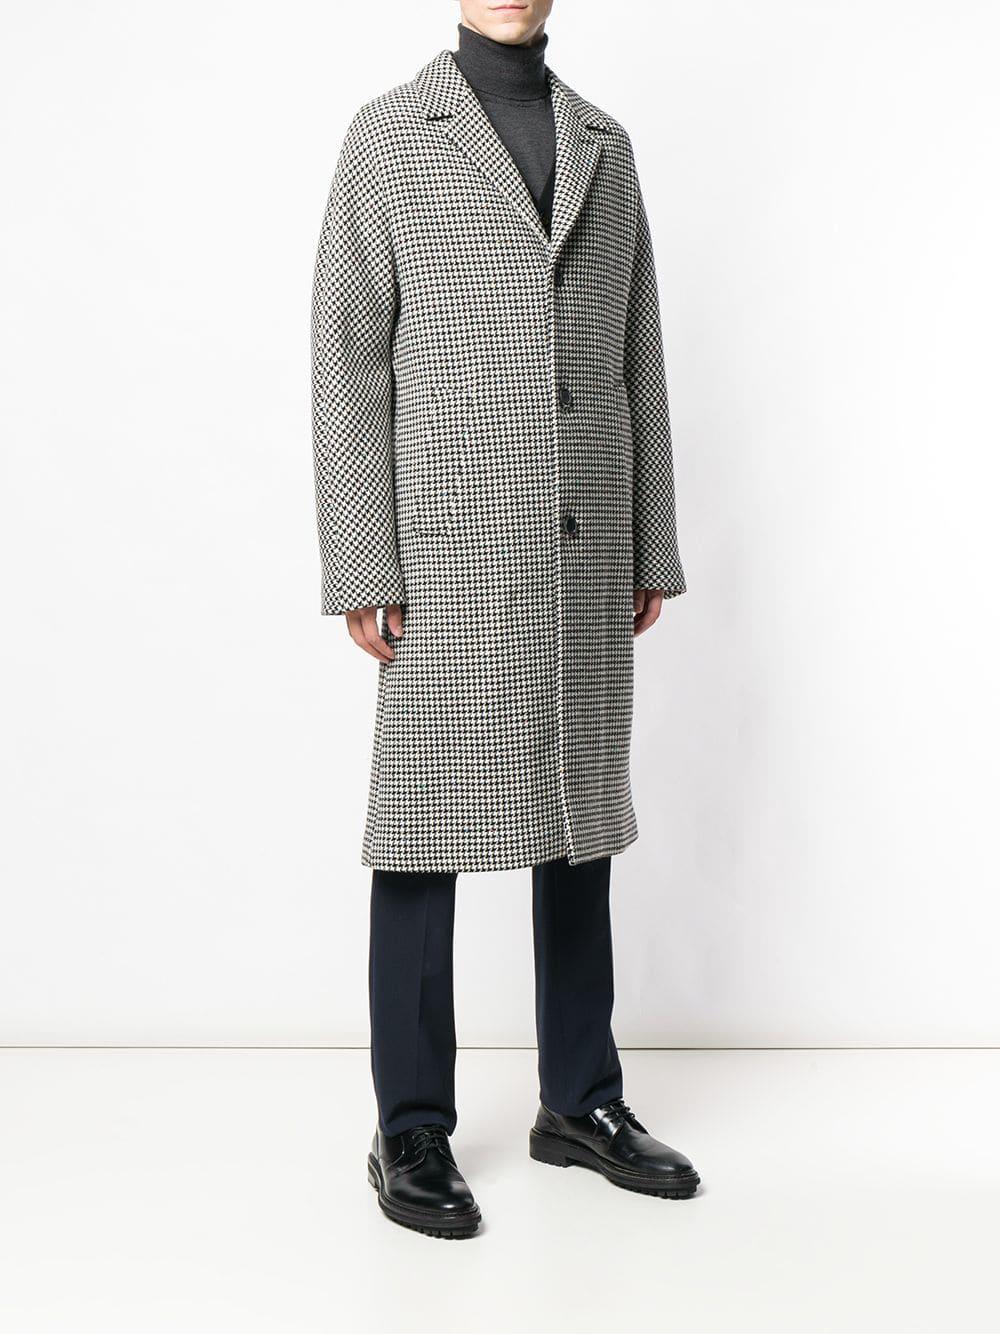 JOSEPH Wool Houndstooth Trench Coat in Black for Men - Lyst